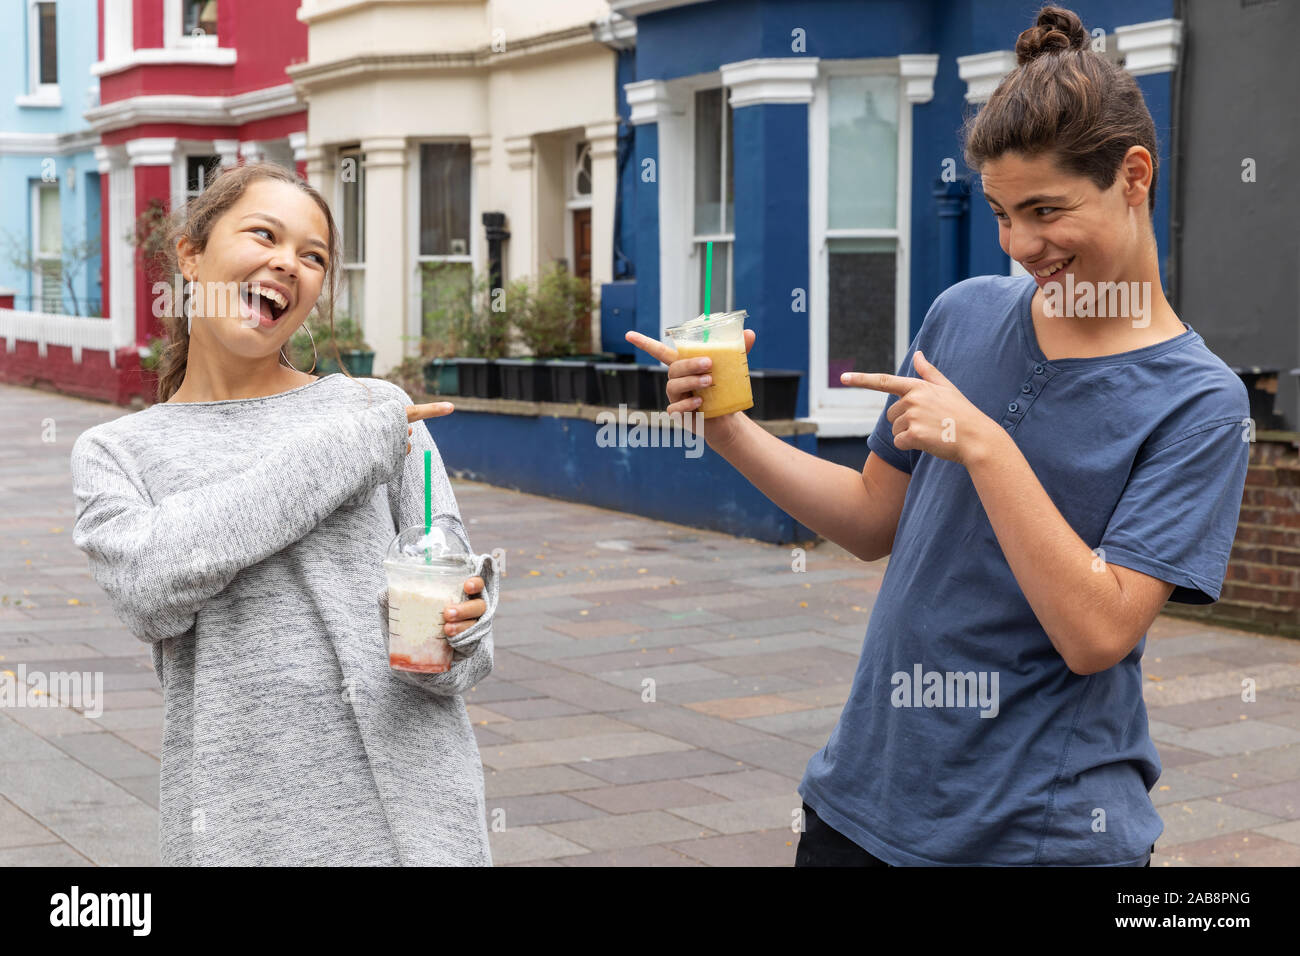 Teenager couple with shake in hand, fun and complicity. Urban context. Stock Photo